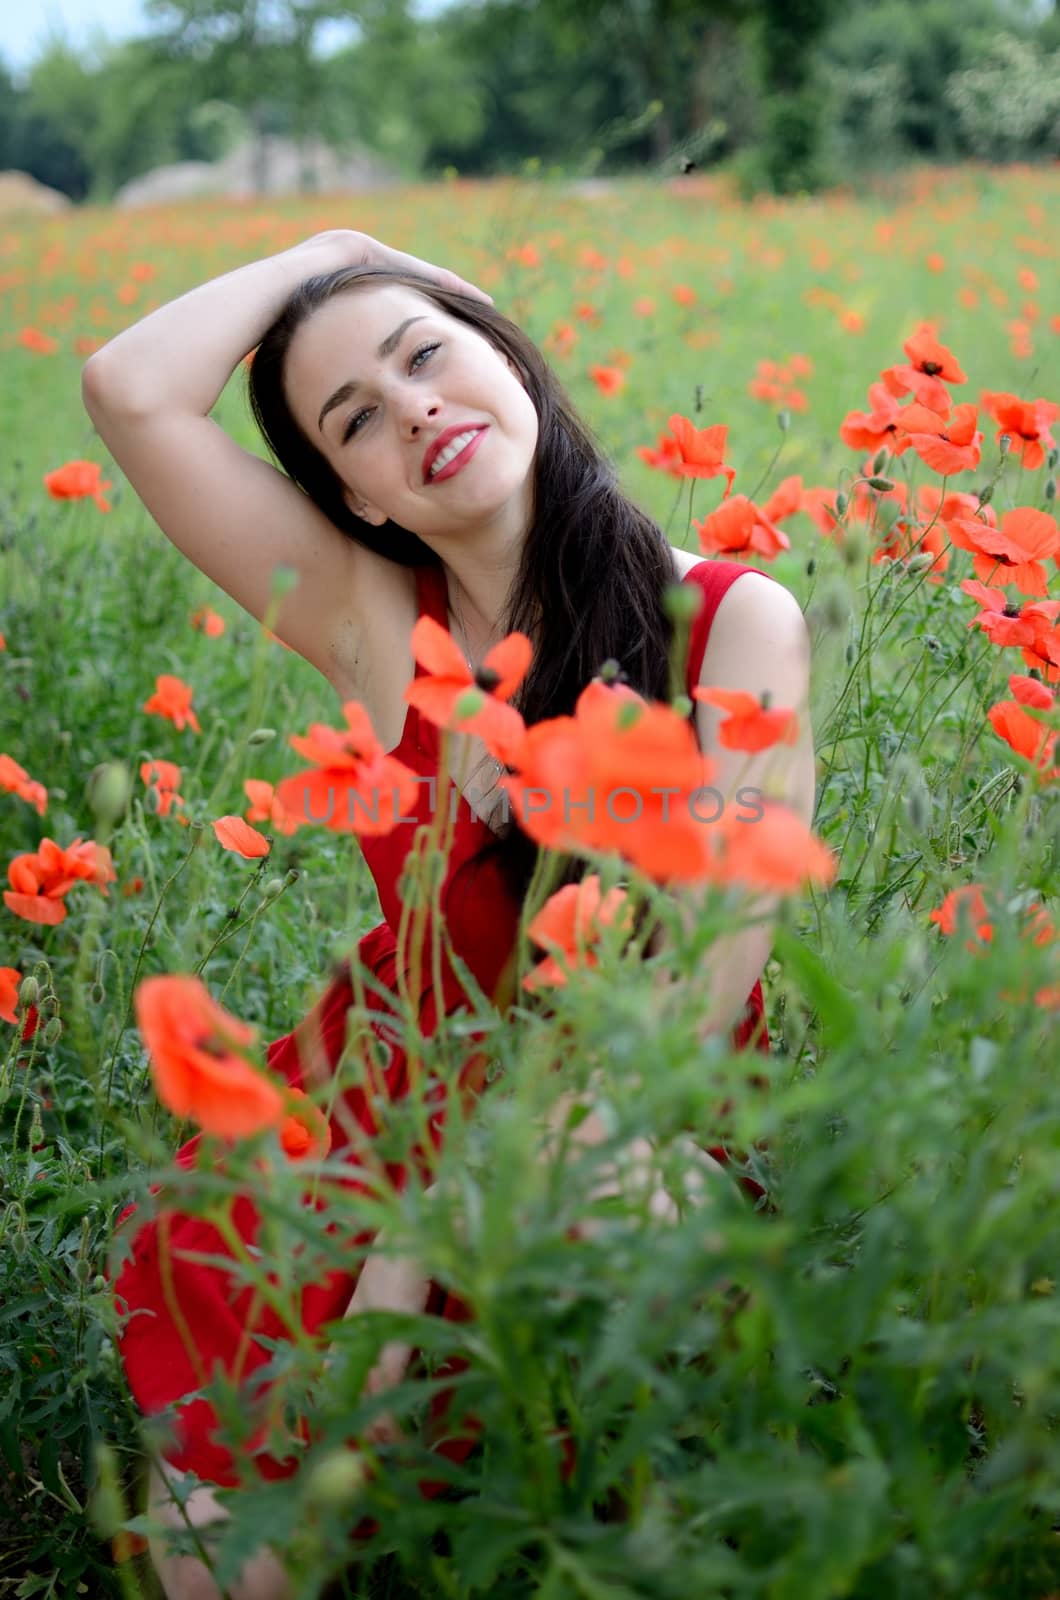 Beautiful polish girl surrounded by field full of poppies. Young female model with charming smile, wearing red dress.